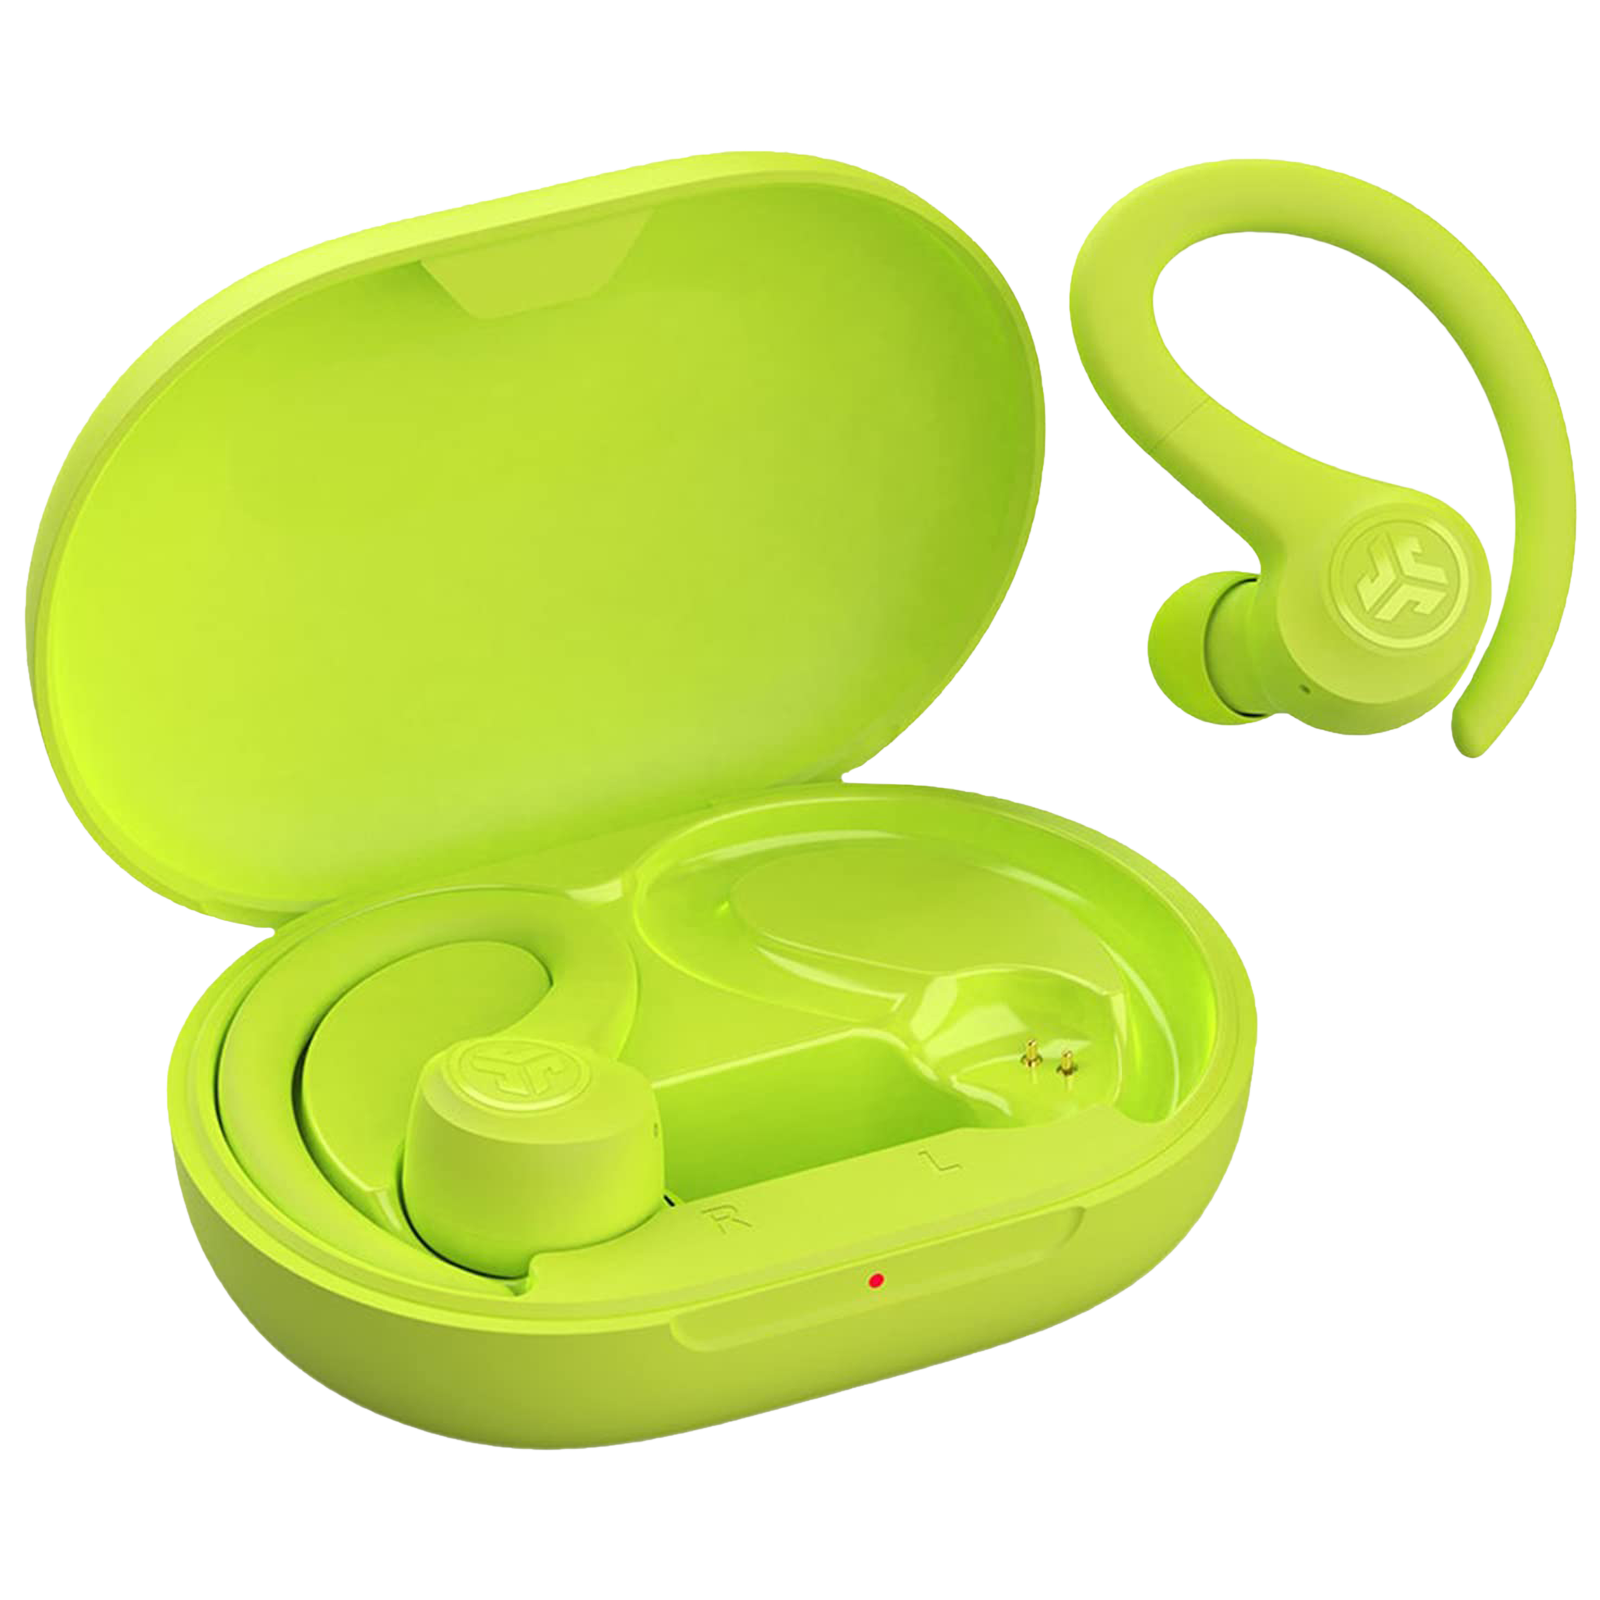 JLAB Go Air Sport TWS Earbuds with Active Noise Cancellation (IP55 Water Resistant, C3 Clear Calling, Yellow)